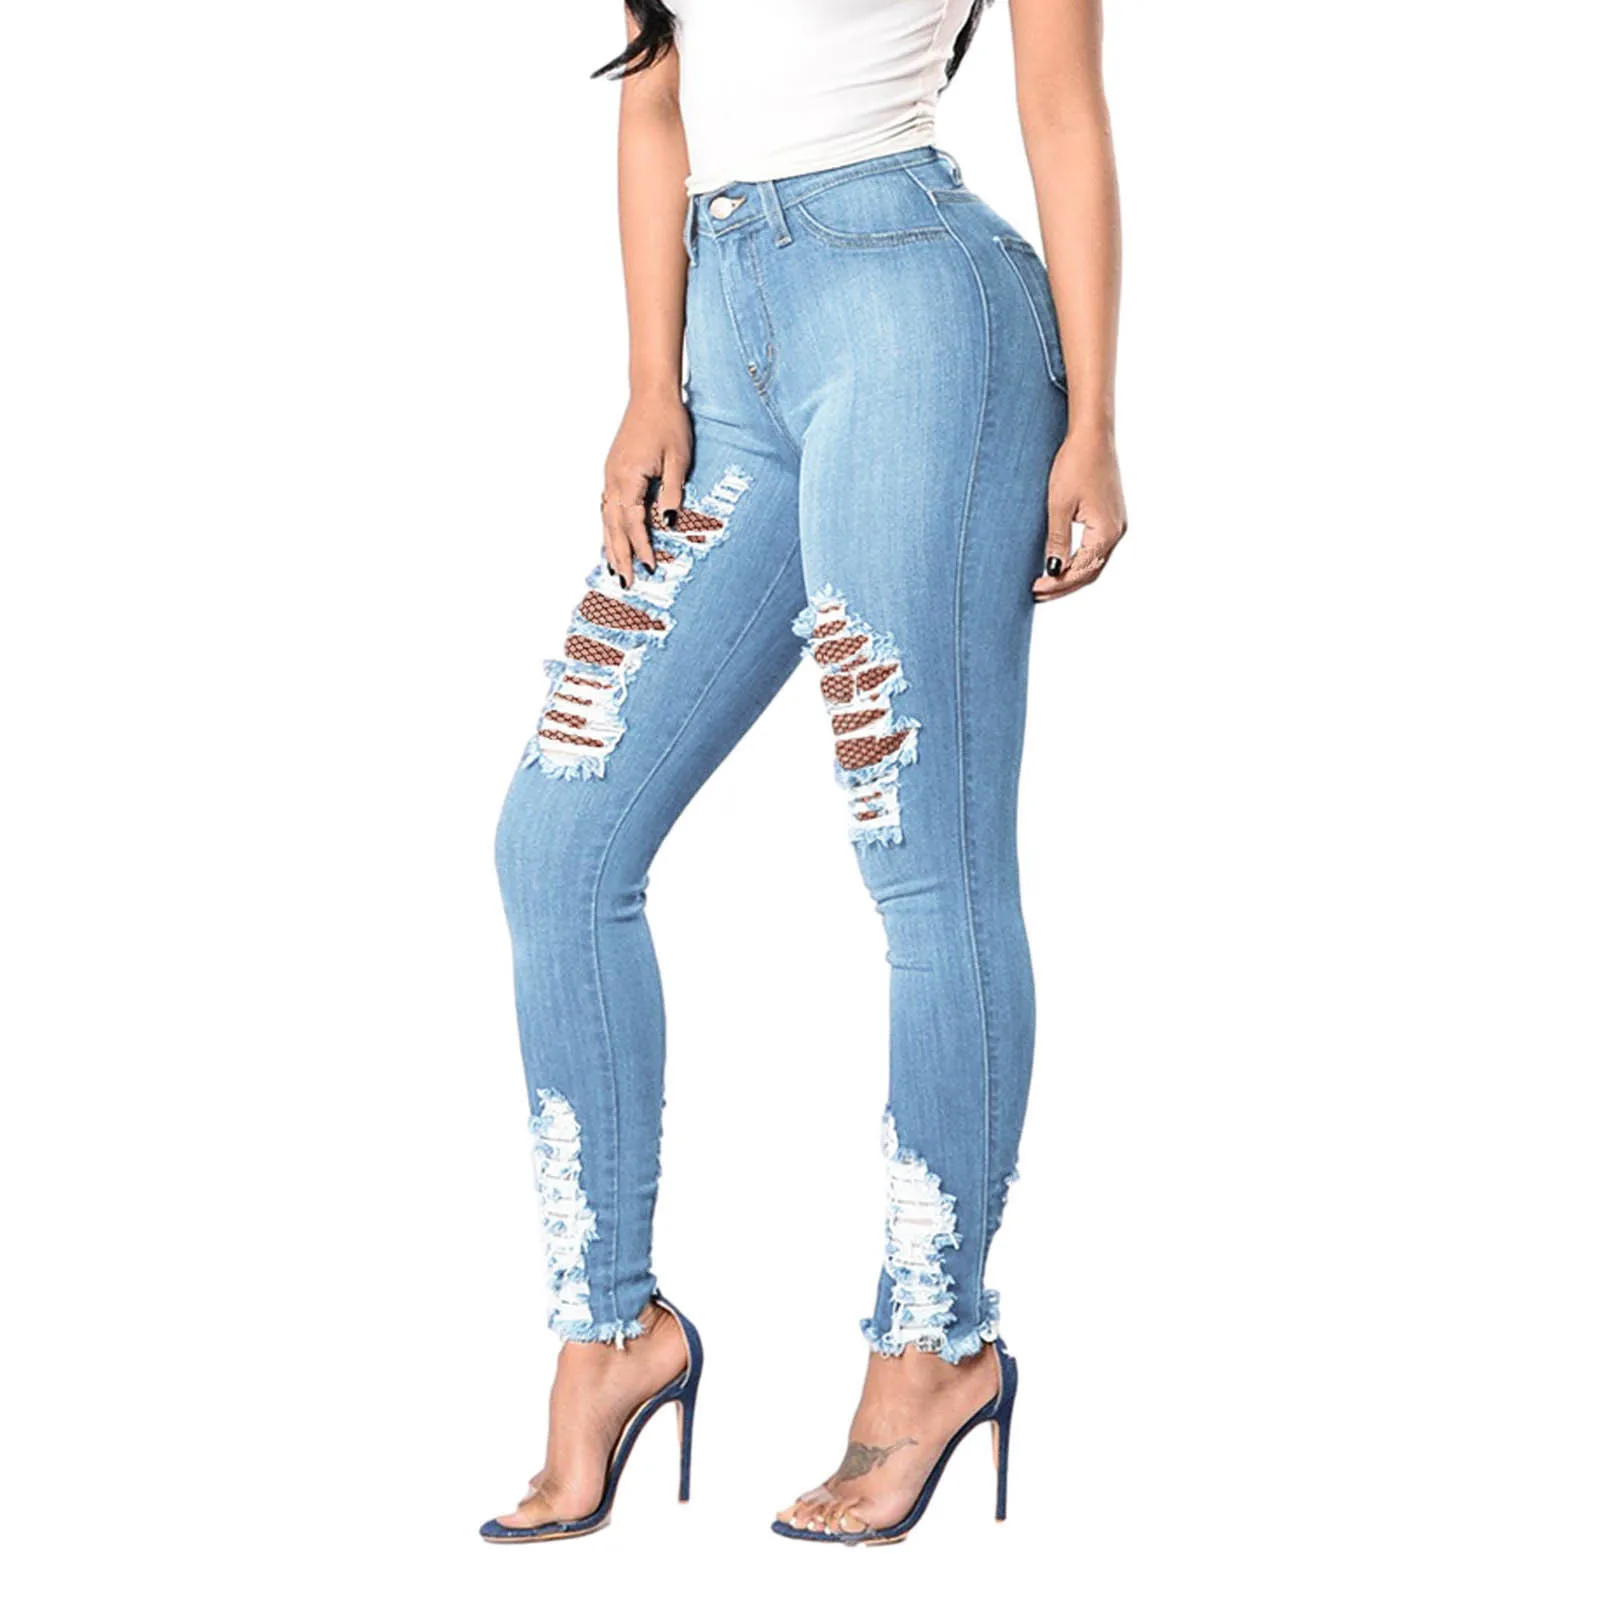 

Women's 2021 New Fashion And Casual Solid Colour Holes Excoriation Pocket High-Waisted Slimming Thin Pencil Jeans Long Trousers